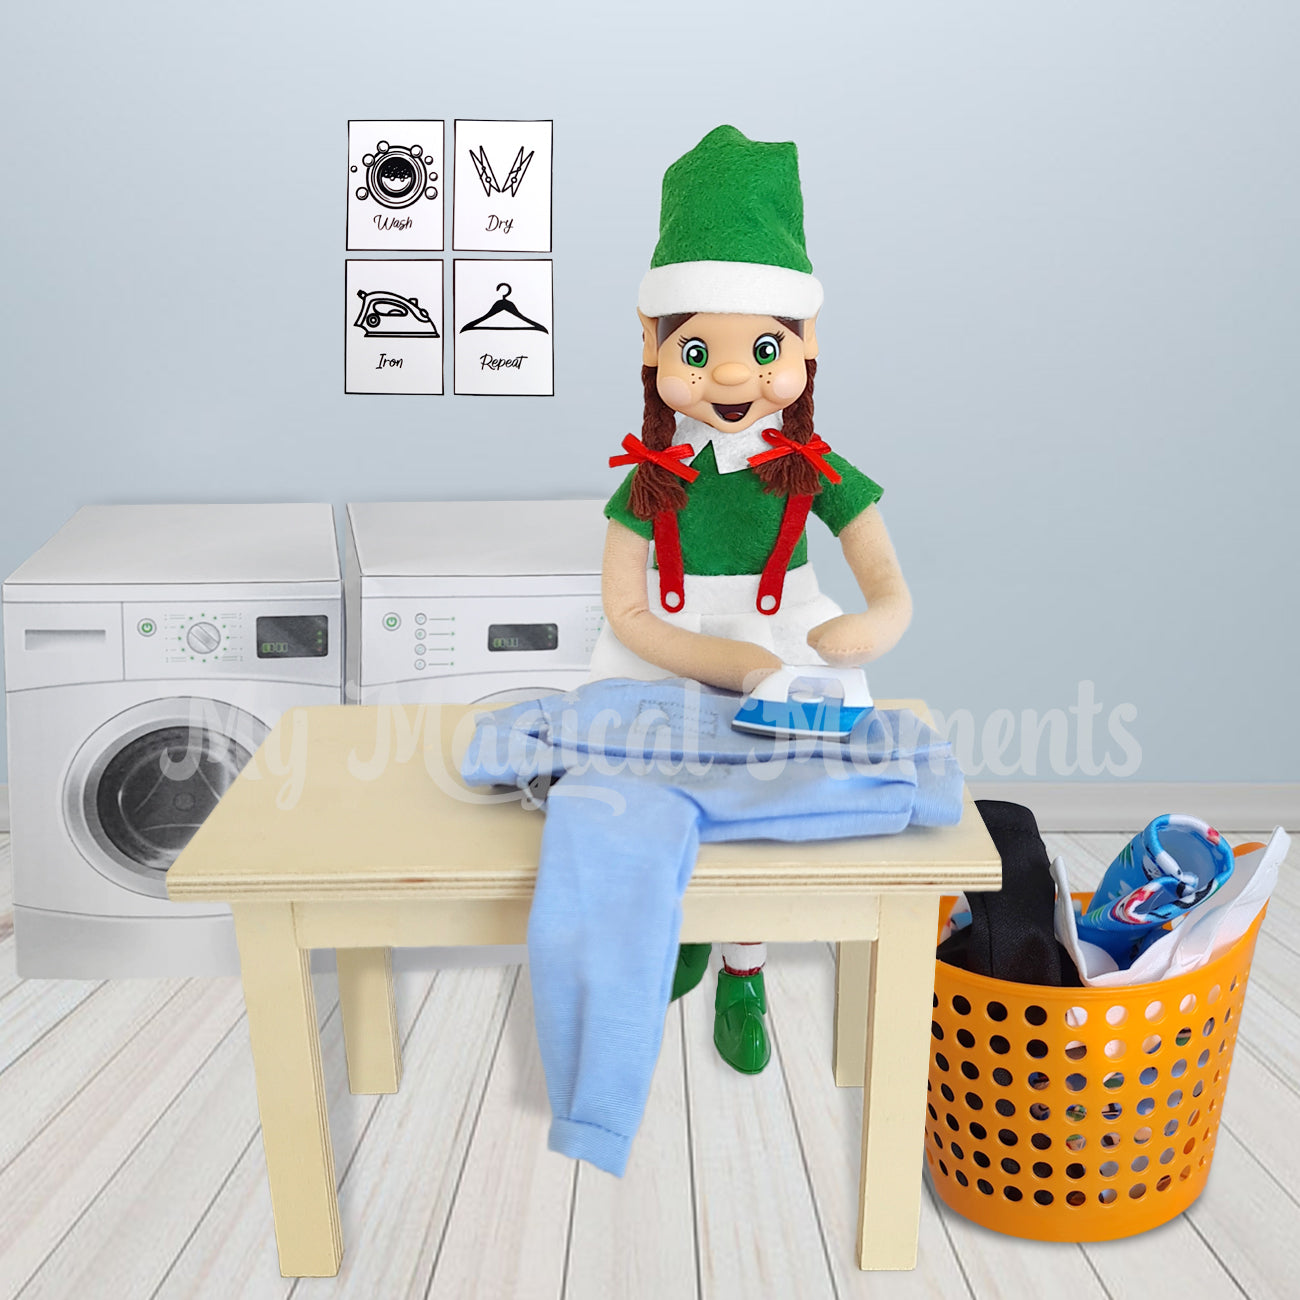 Brown Hair elf ironing clothes in an elf sized laundry